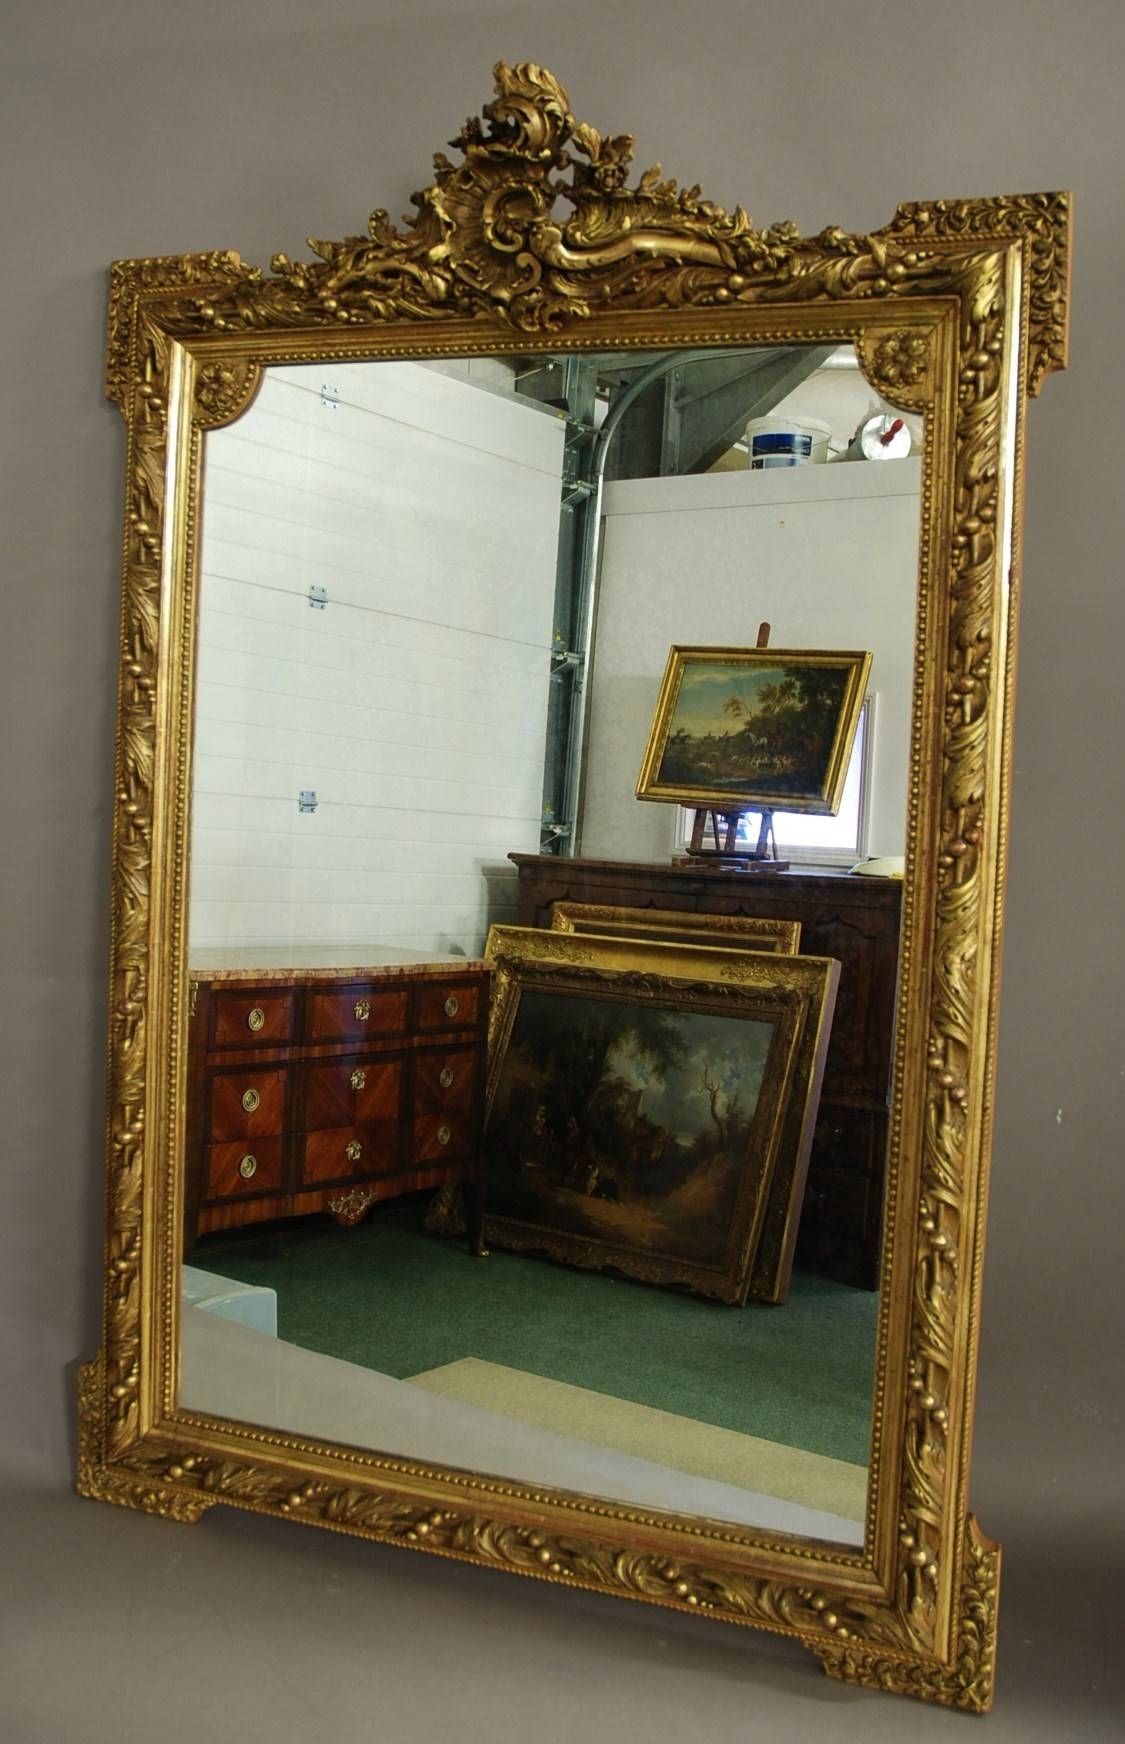 Large 19th Century Ornate French Gilt Mirror (1880 France) From Regarding Ornate Large Mirrors (View 14 of 25)